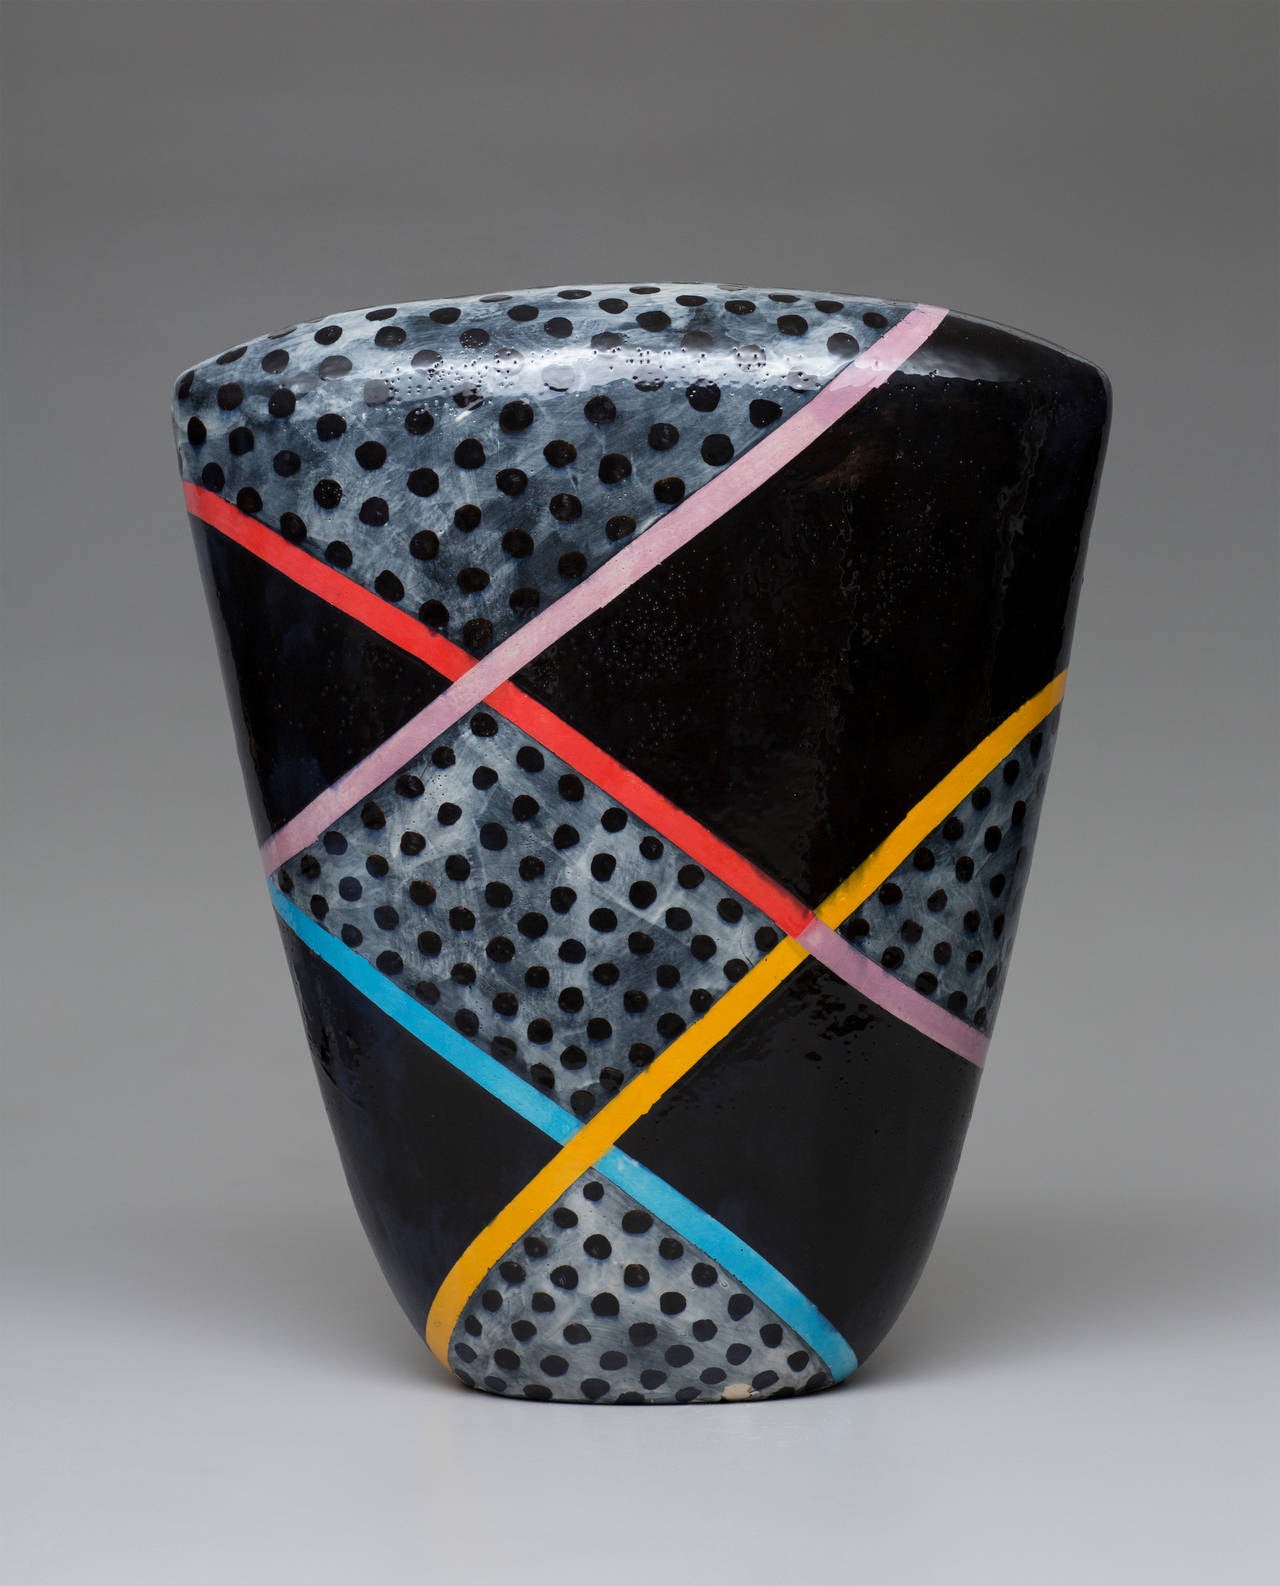 Jun Kaneko, born in Nagoya, Japan in 1942, has continually experimented with the traditional bounds of the ceramic medium. He moved to the United States in 1963 and studied with noted ceramic artists Peter Voulkos, Paul Soldner, and Jerry Rothman.